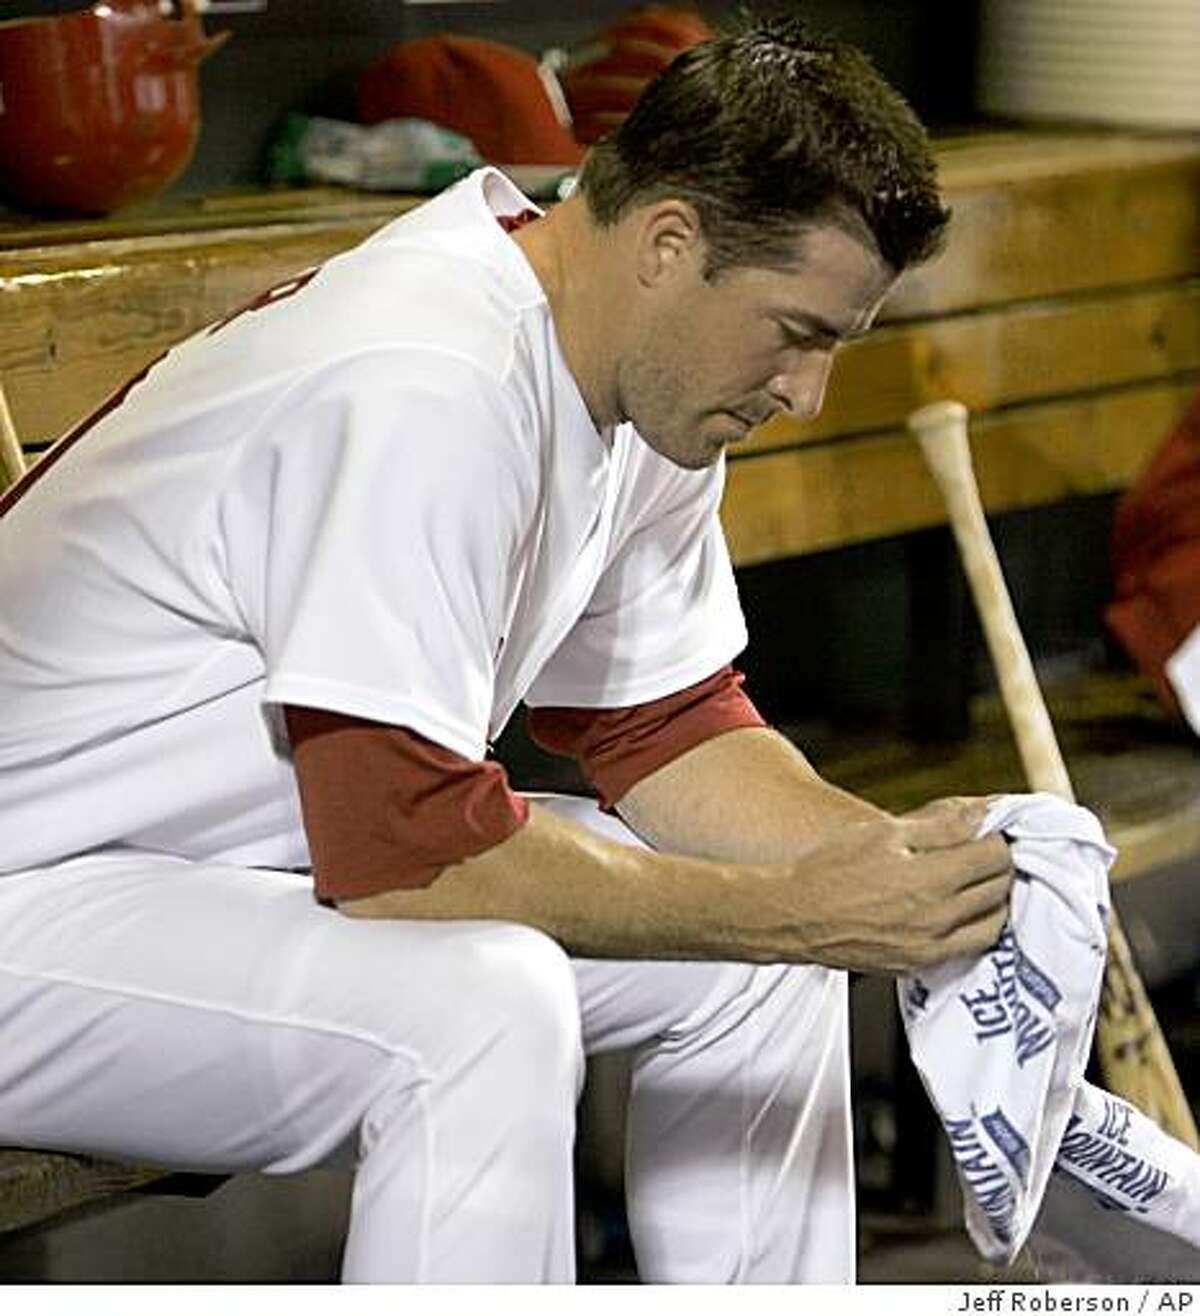 St. Louis Cardinals relief pitcher Mark Mulder sits on the bench after being pulled out of the baseball game during the seventh inning against the New York Mets, Wednesday, July 2, 2008, in St. Louis. (AP Photo/Jeff Roberson)